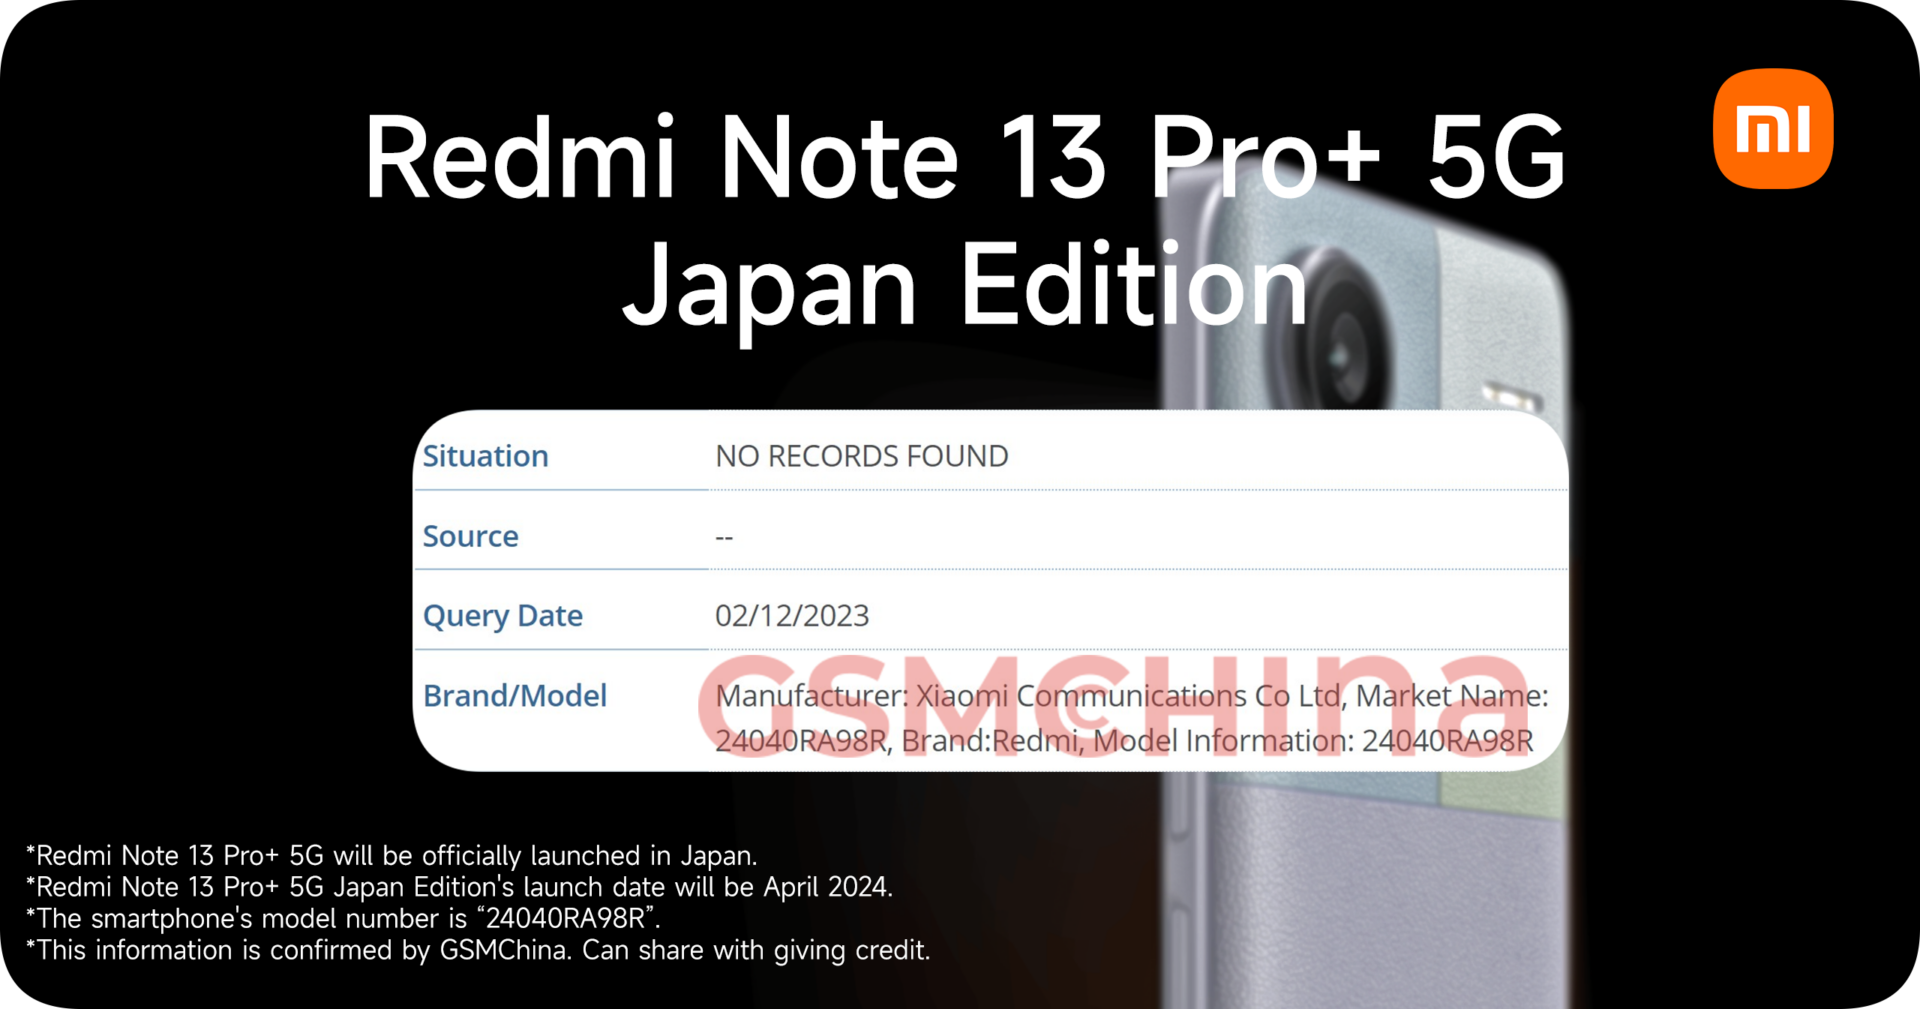 Redmi Note 13 Pro+ Review: Why shouldn't you buy it? - GSMChina